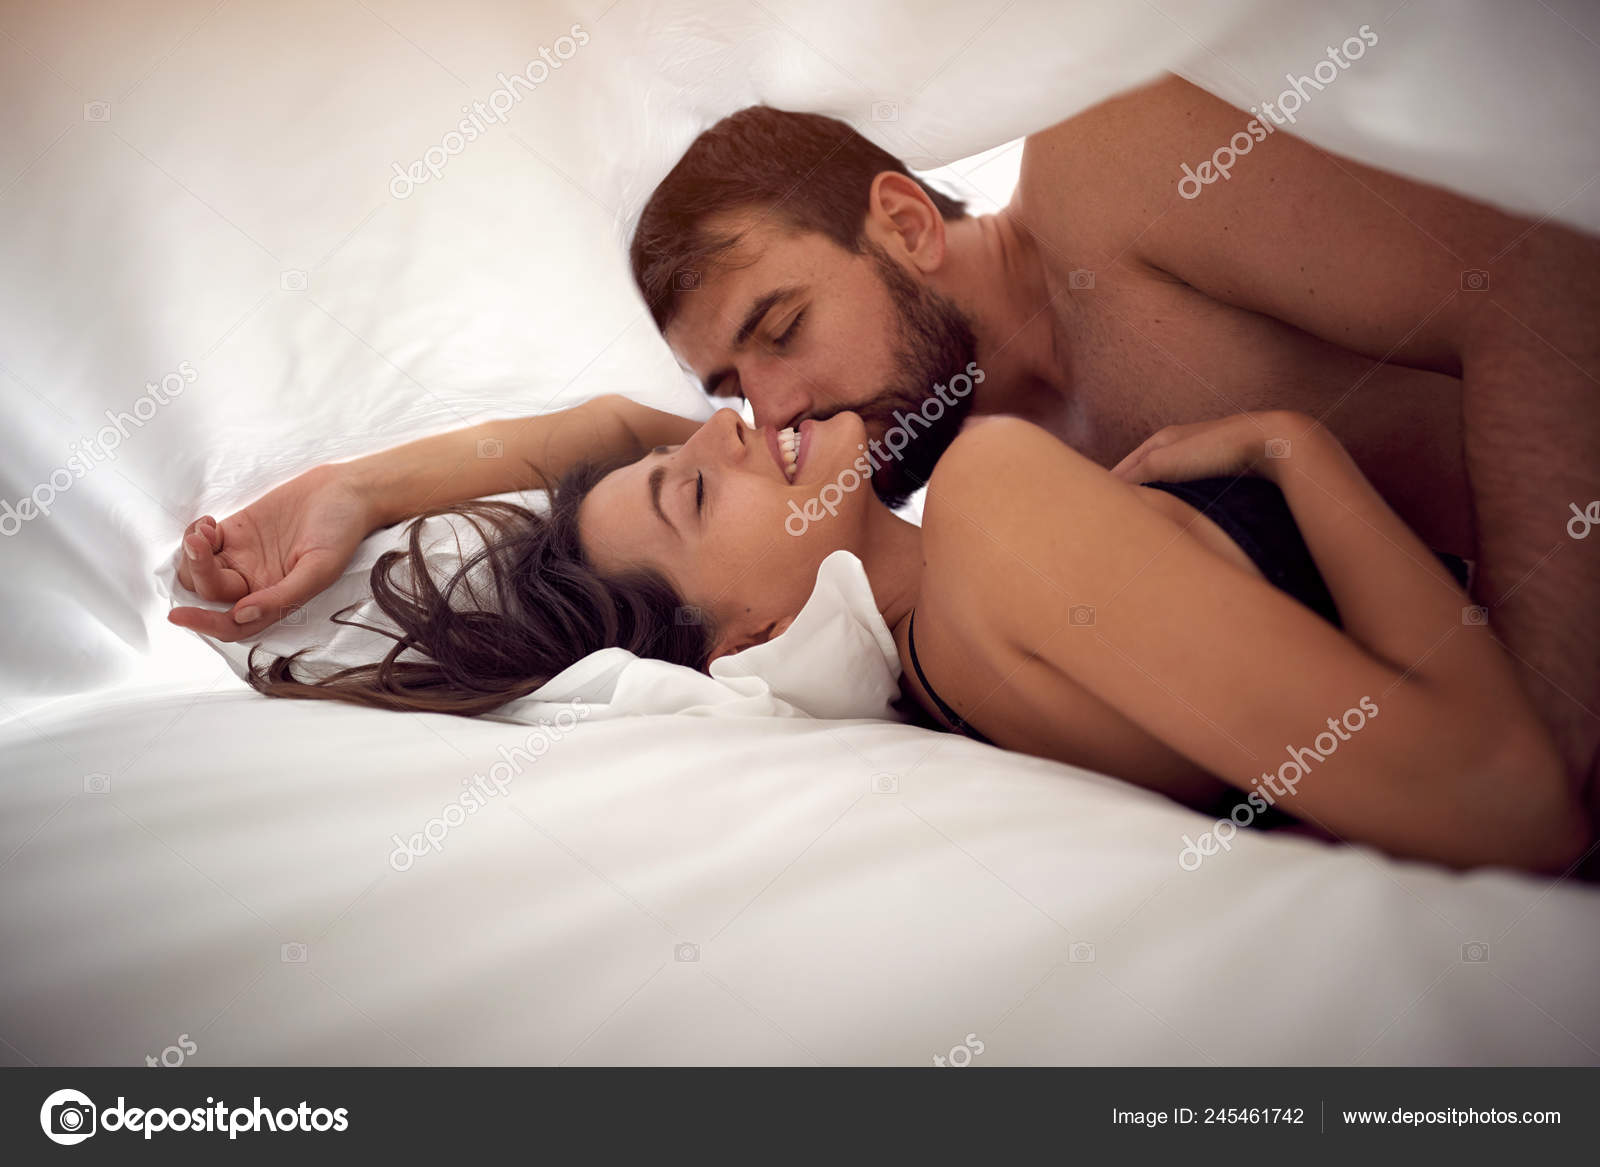 Young Loving Man Woman Making Love Bed Passionate Sex Stock Photo by ©luckybusiness 245461742 image